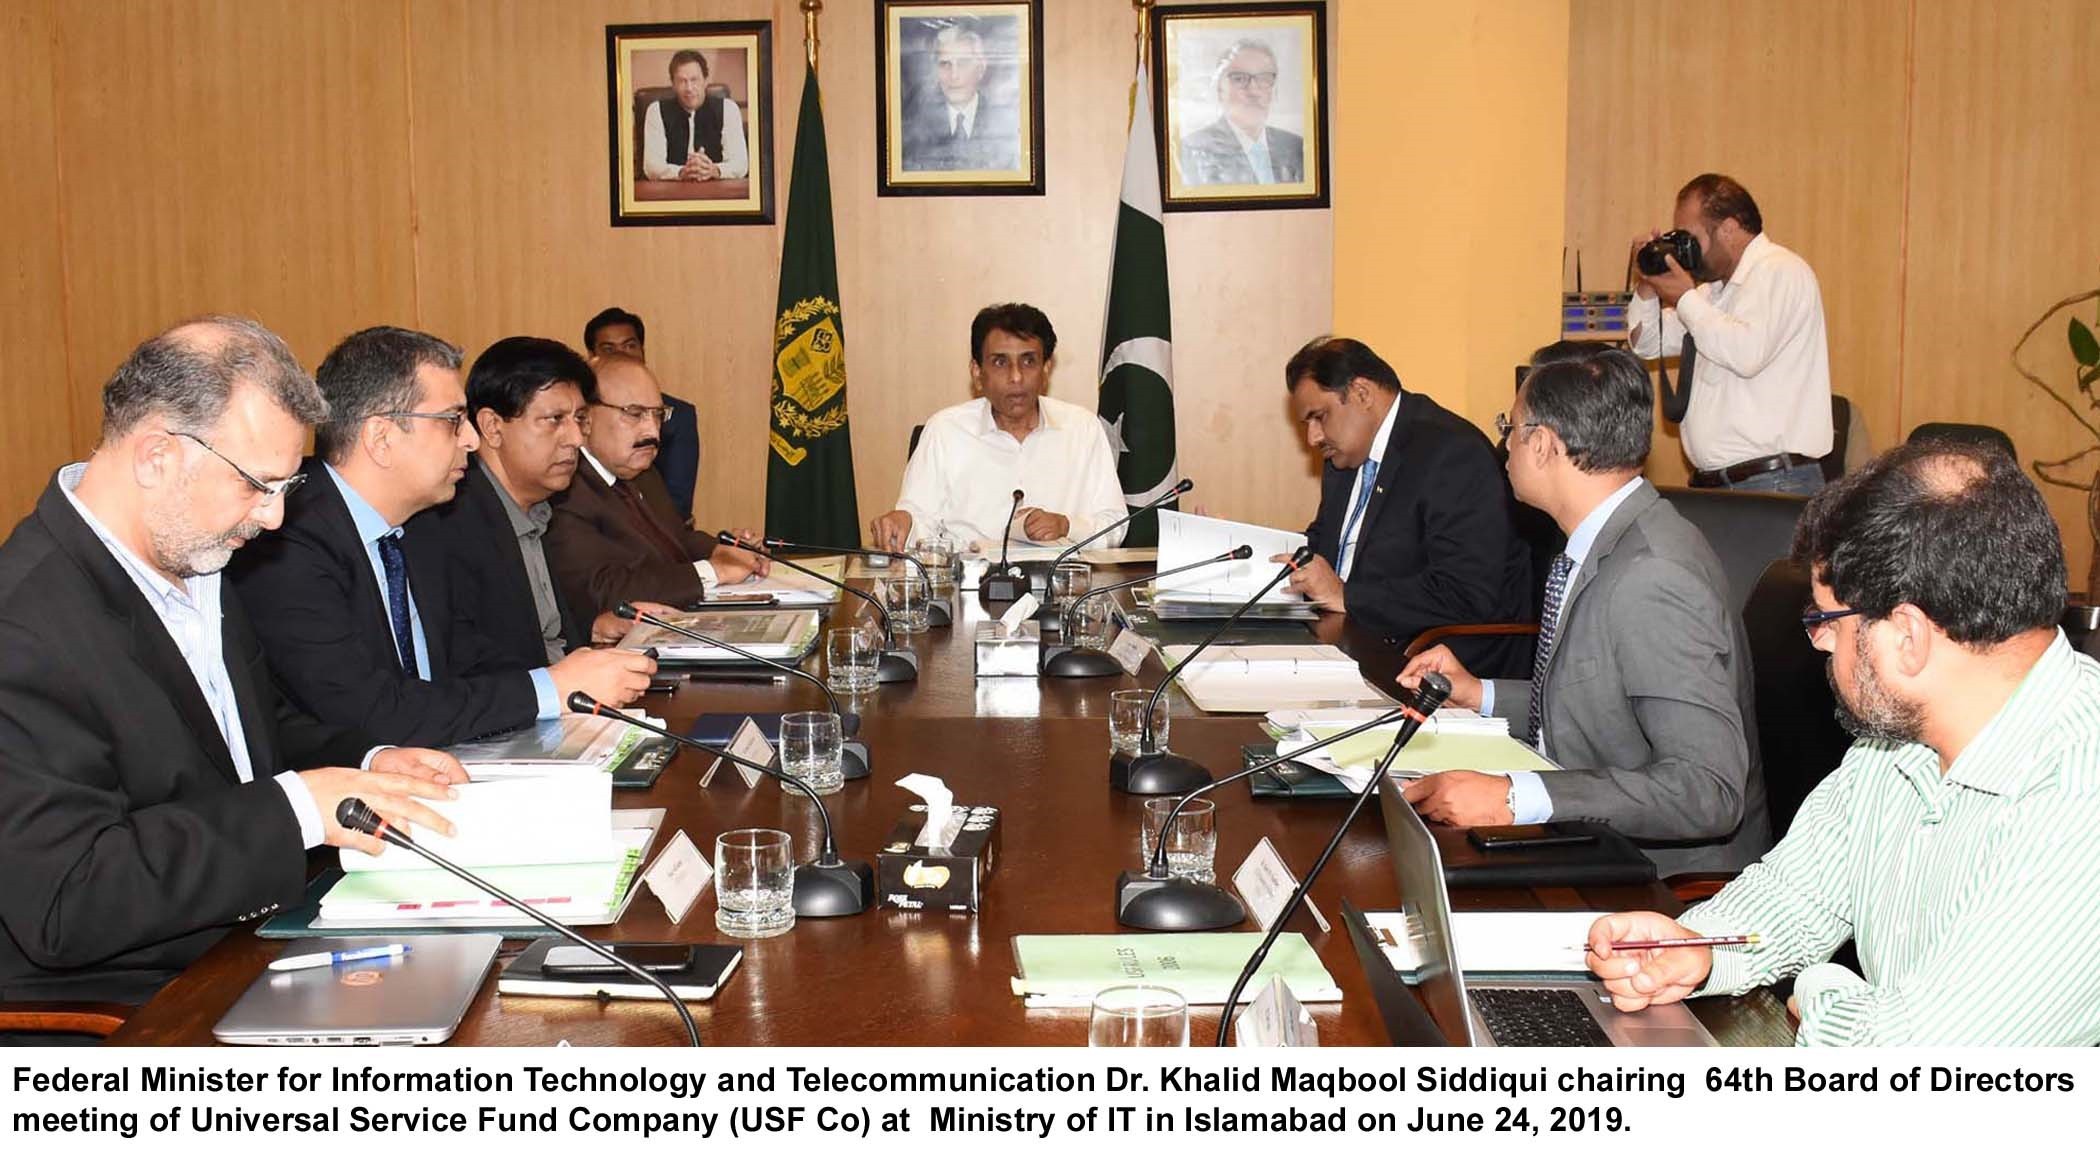 MINISTER OF STATE FOR IT AND TELECOM CHAIRED THE 64TH BOARD OF DIRECTOR’S MEETING OF USF CO